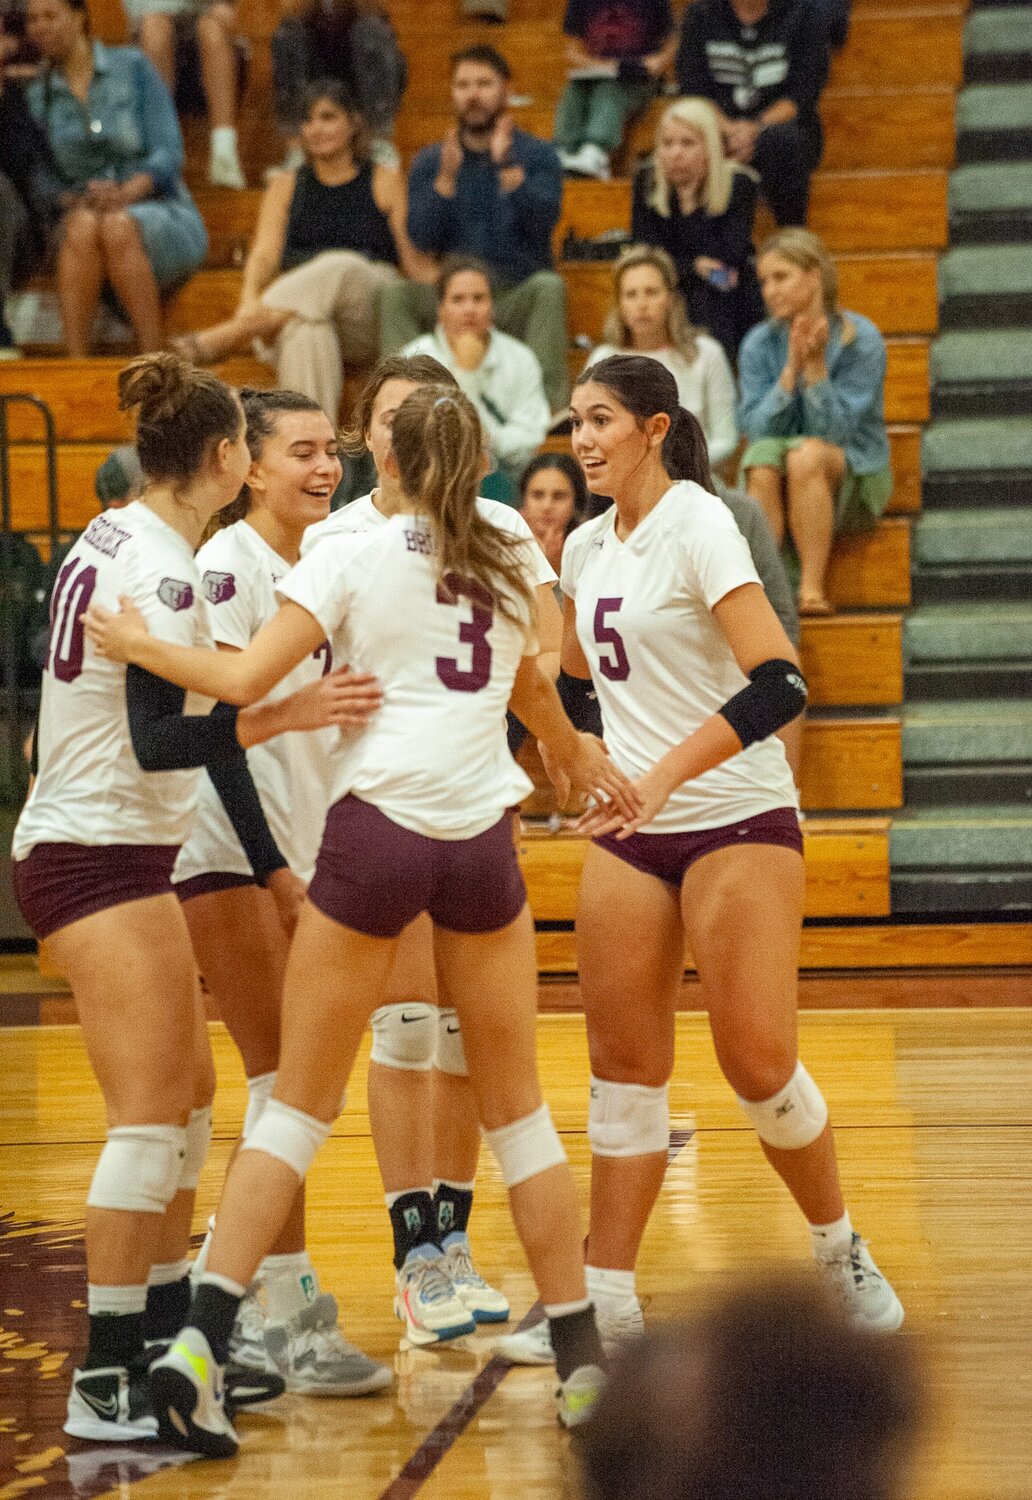 The Broadneck volleyball team celebrated winning a point.